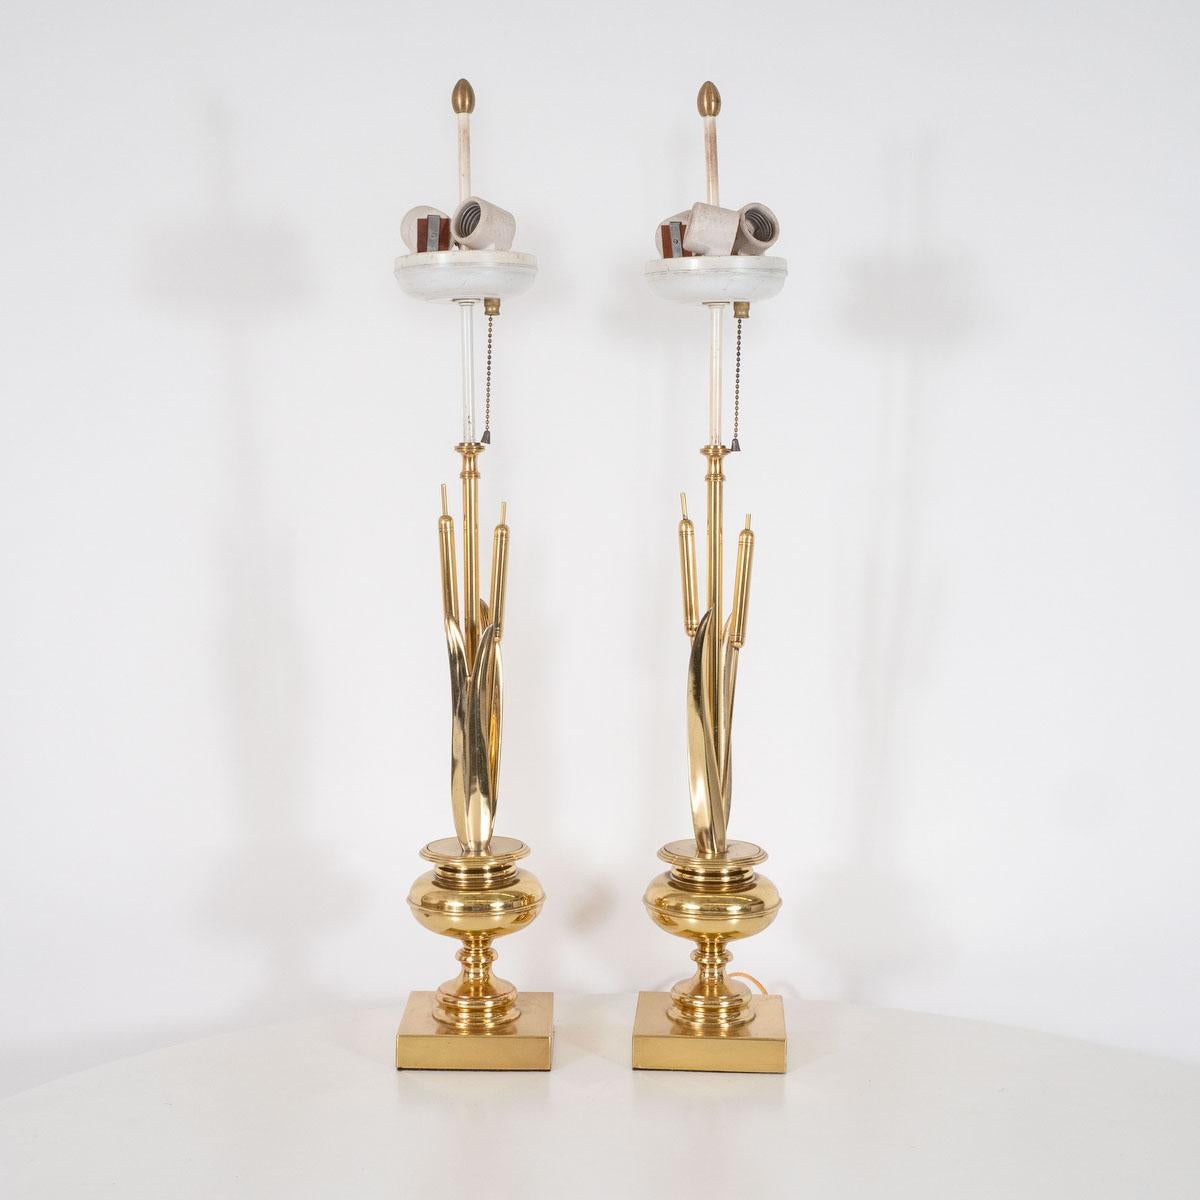 Pair of stylized brass bulrush form table lamps with urn bases.